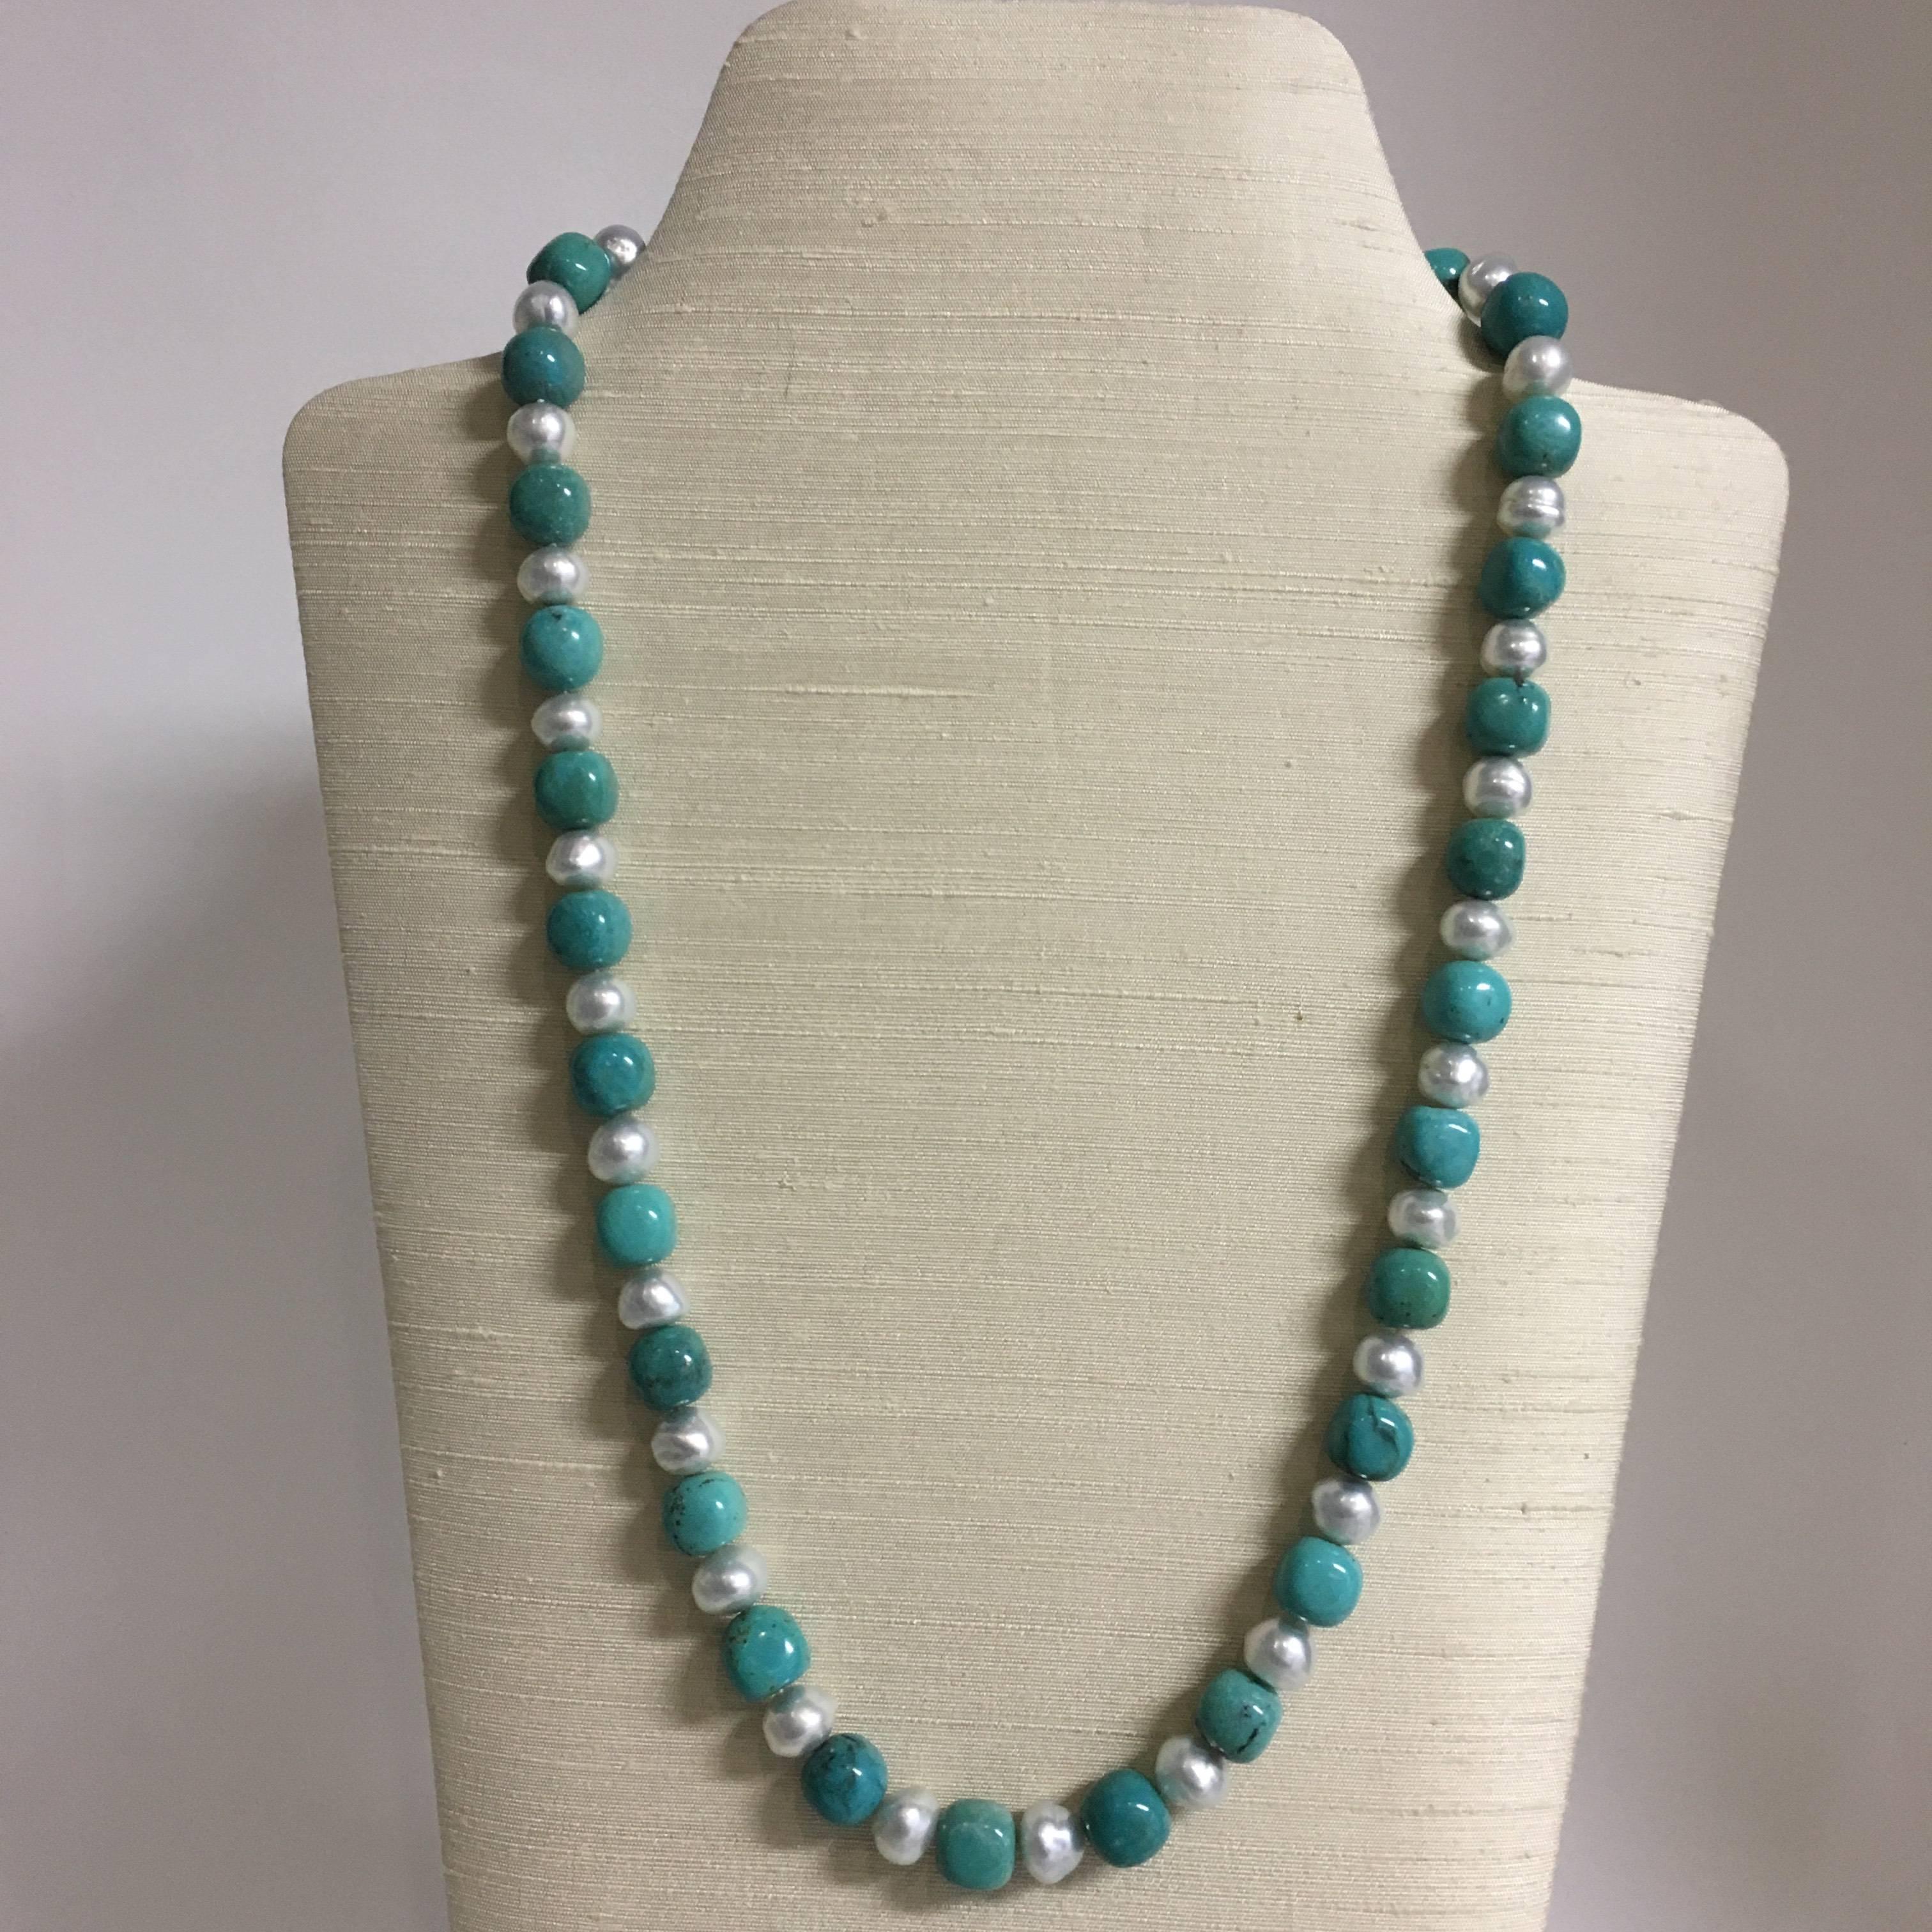 The beautiful 28”L (71cmL) necklace with slightly squarish round Tibetan turquoise beads alternating with luscious South Sea pearls and 18K gold clasp hangs comfortably and elegantly when worn.  